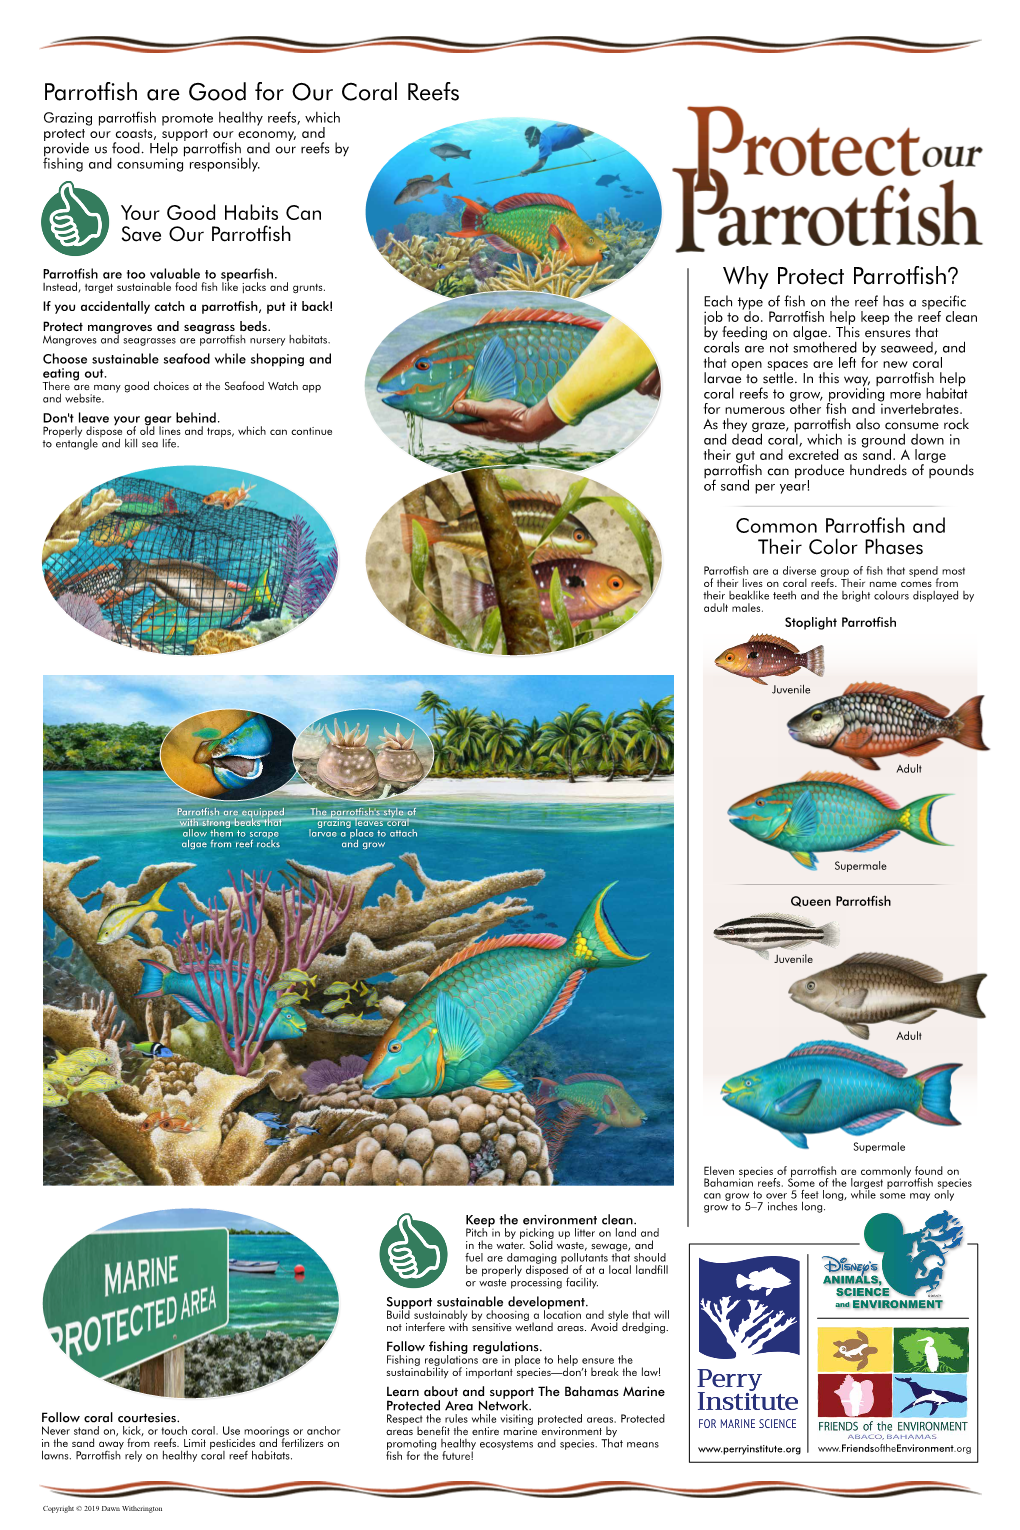 Parrotfish Are Good for Our Coral Reefs Why Protect Parrotfish?